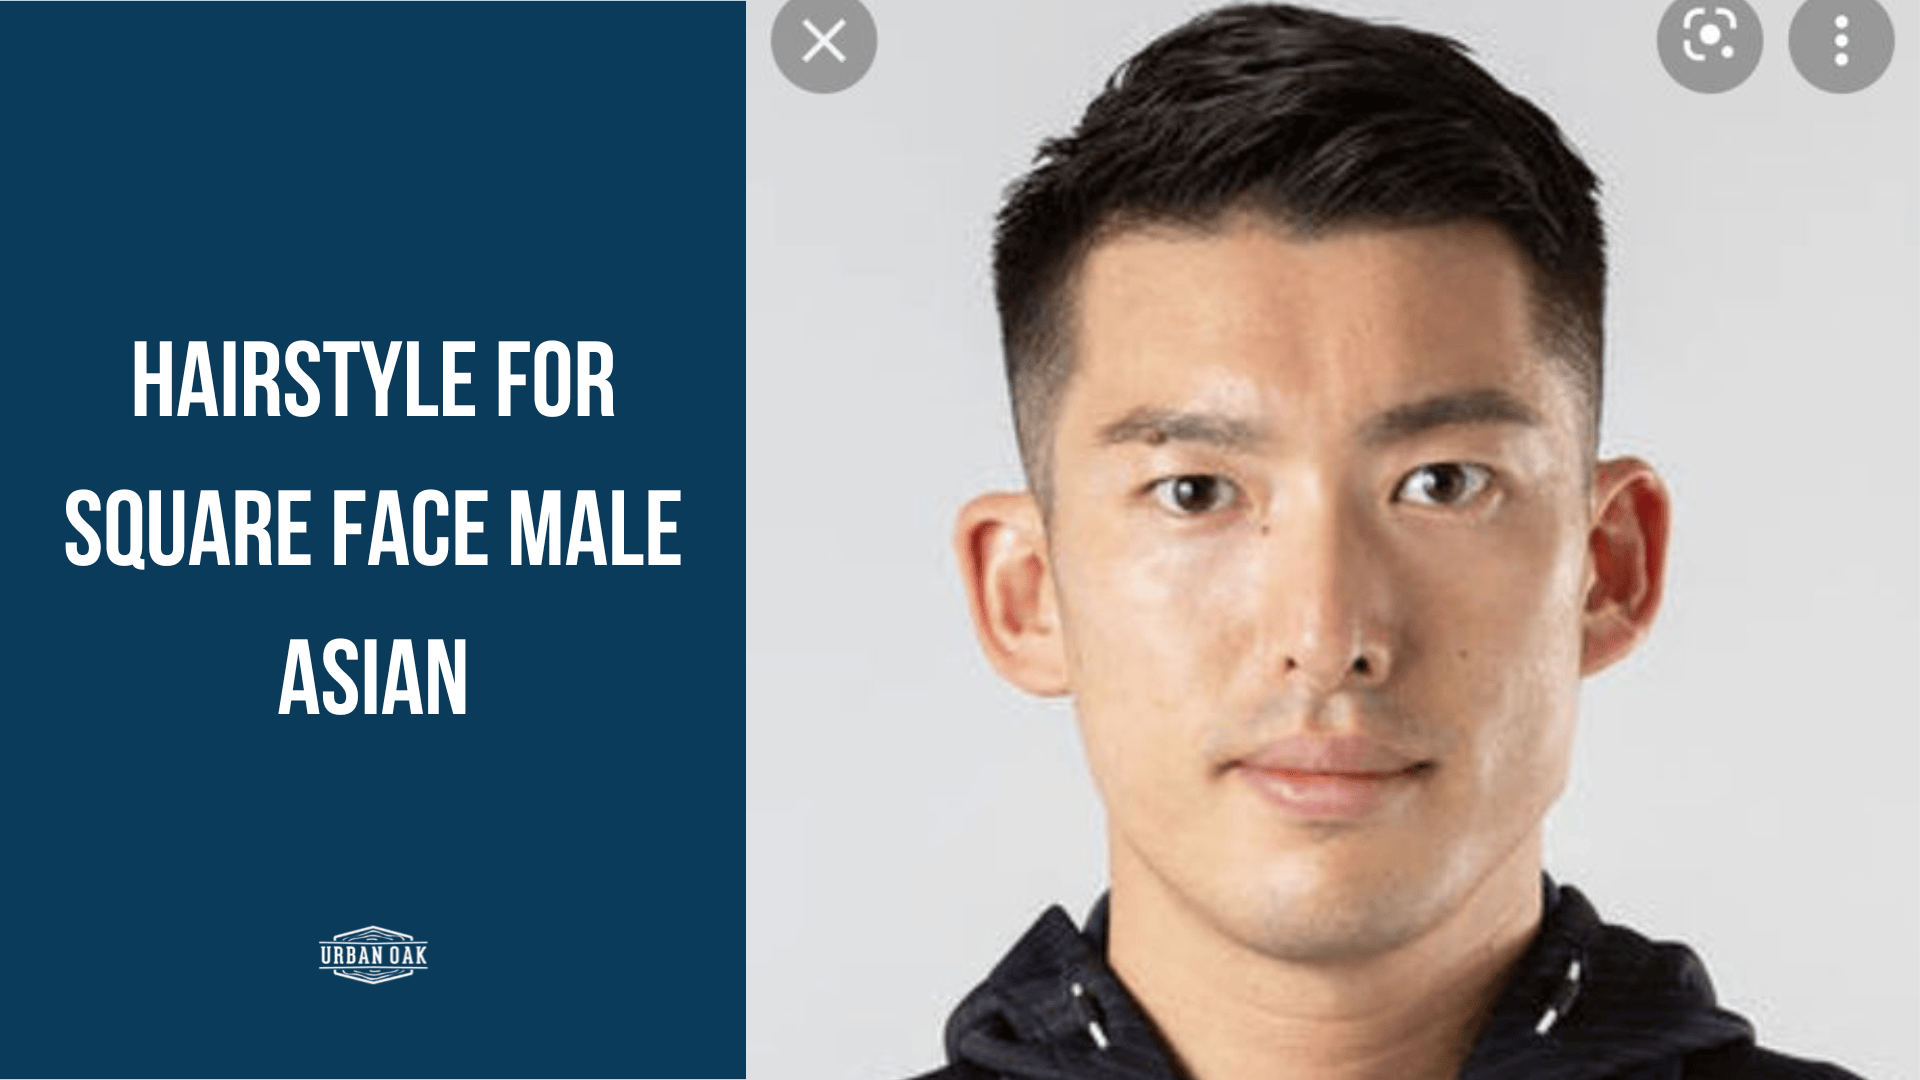 Hairstyle for square face male Asian